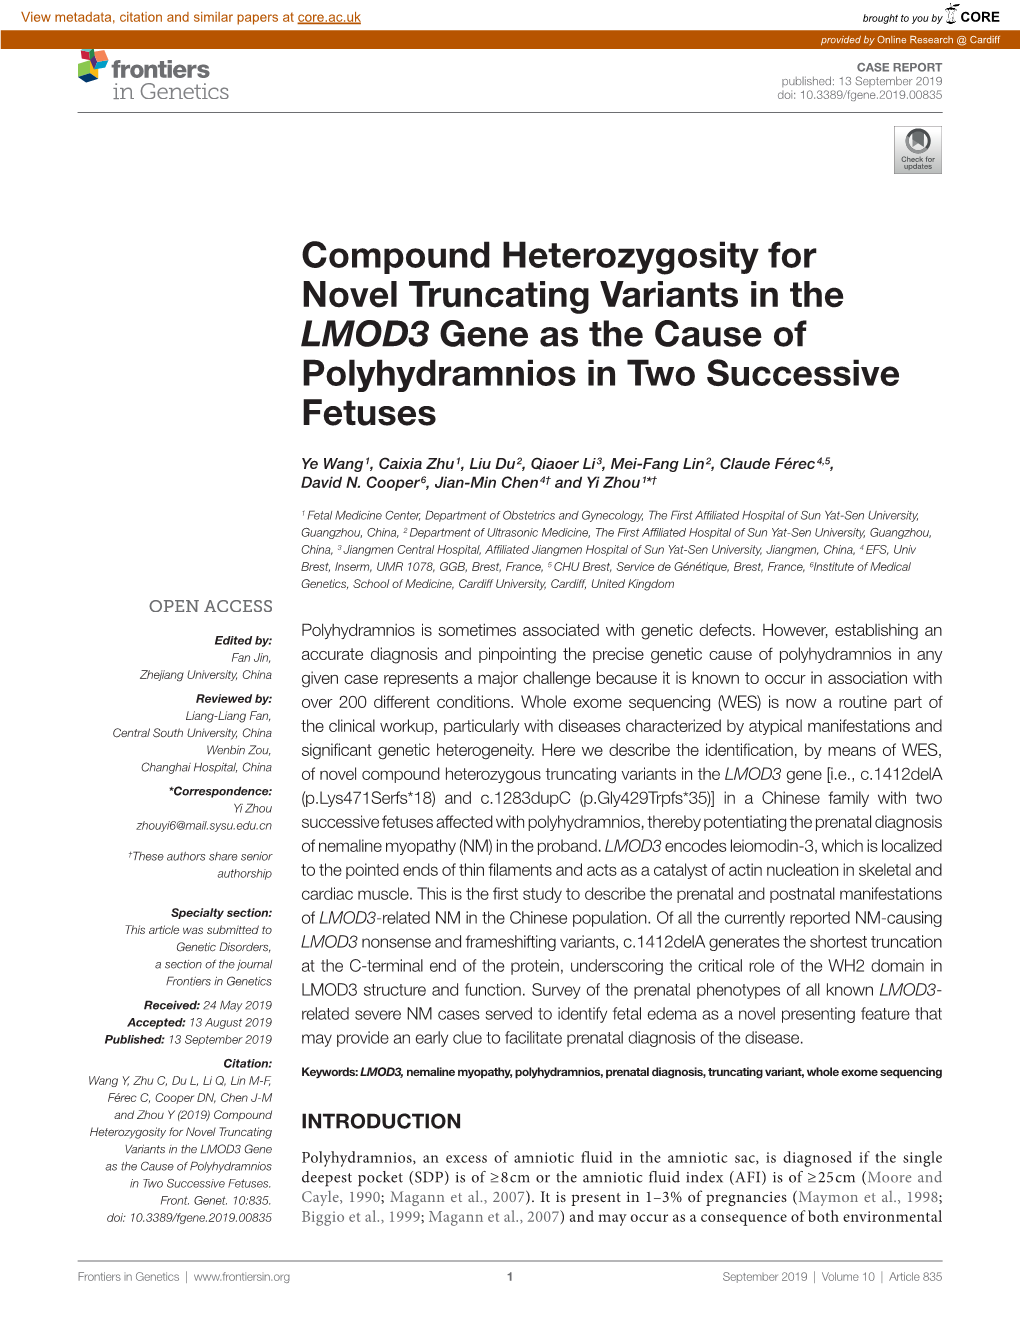 Compound Heterozygosity for Novel Truncating Variants in the LMOD3 Gene As the Cause of Polyhydramnios in Two Successive Fetuses